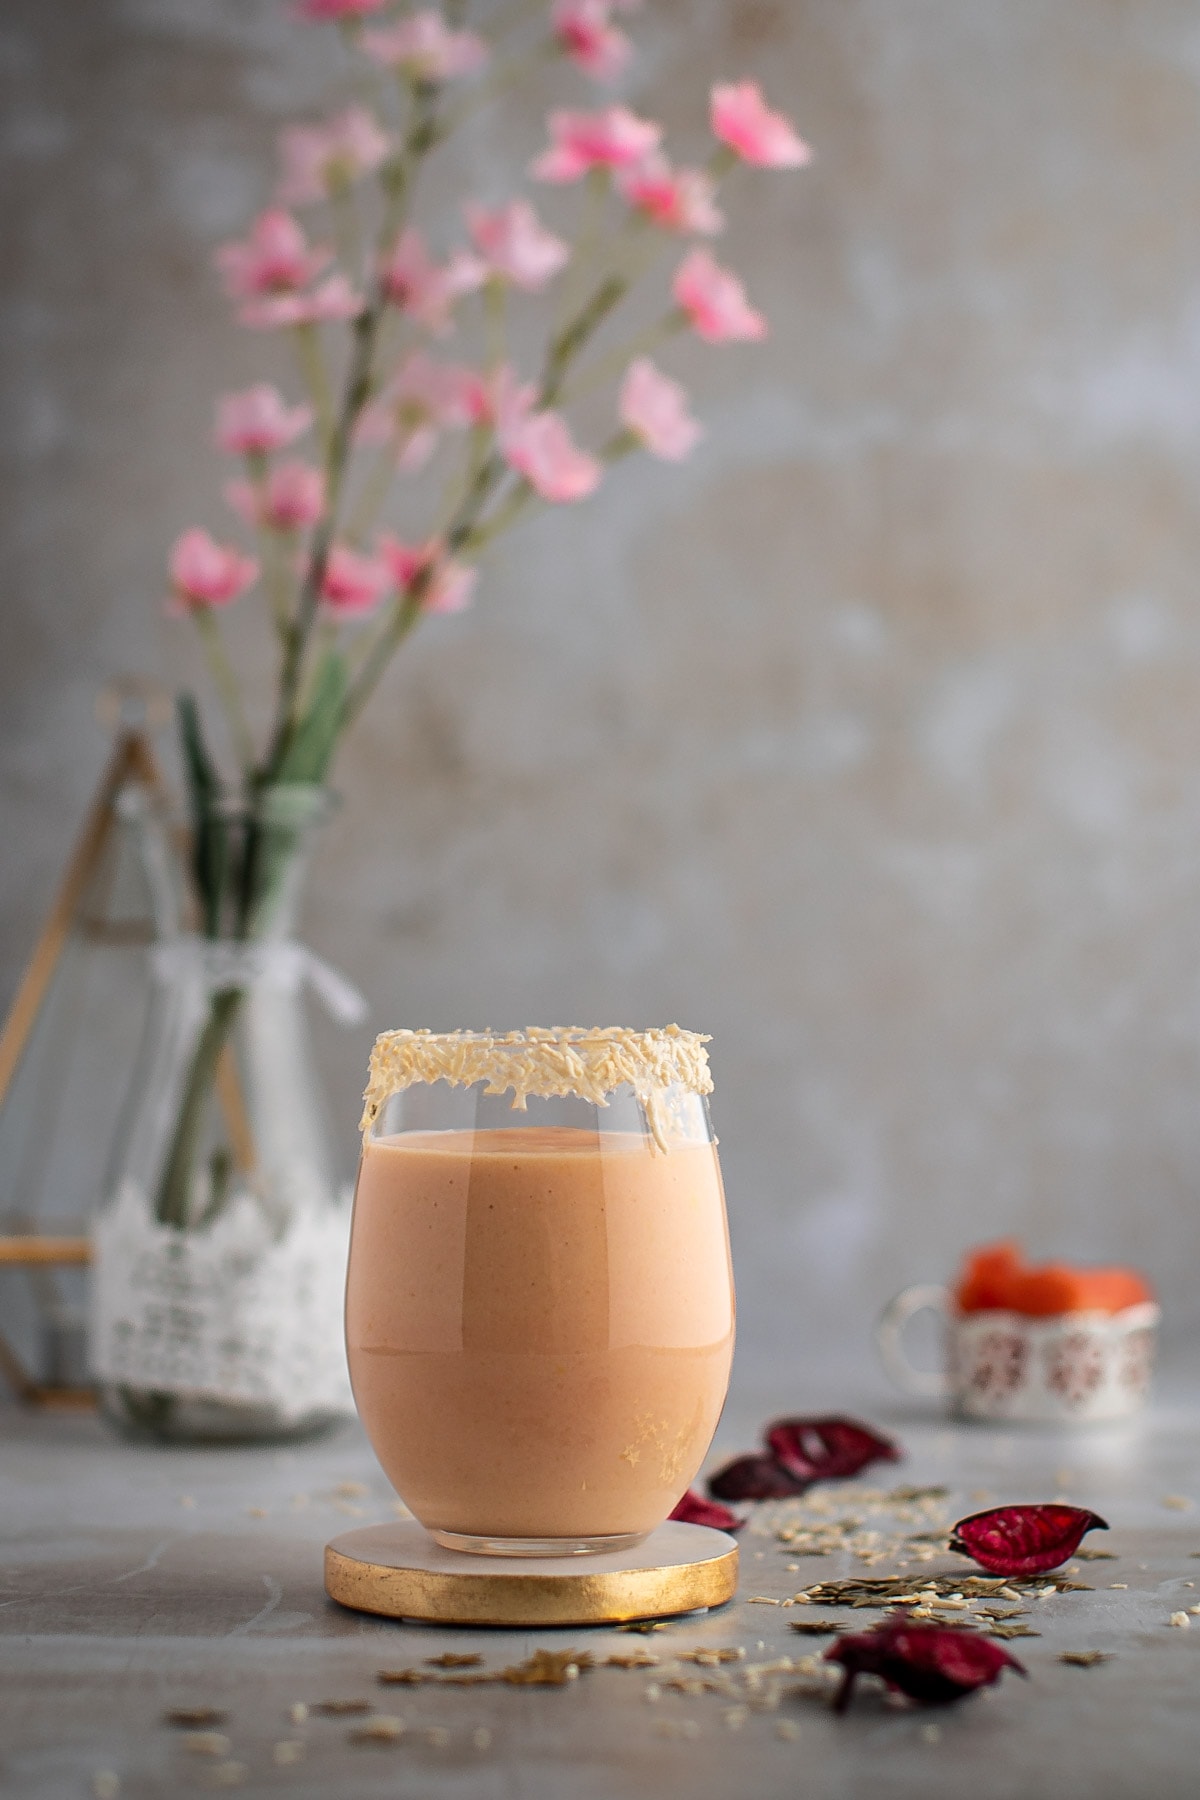 A glass of light pink papaya smoothie on a gold coaster, with pink flowers in the background.